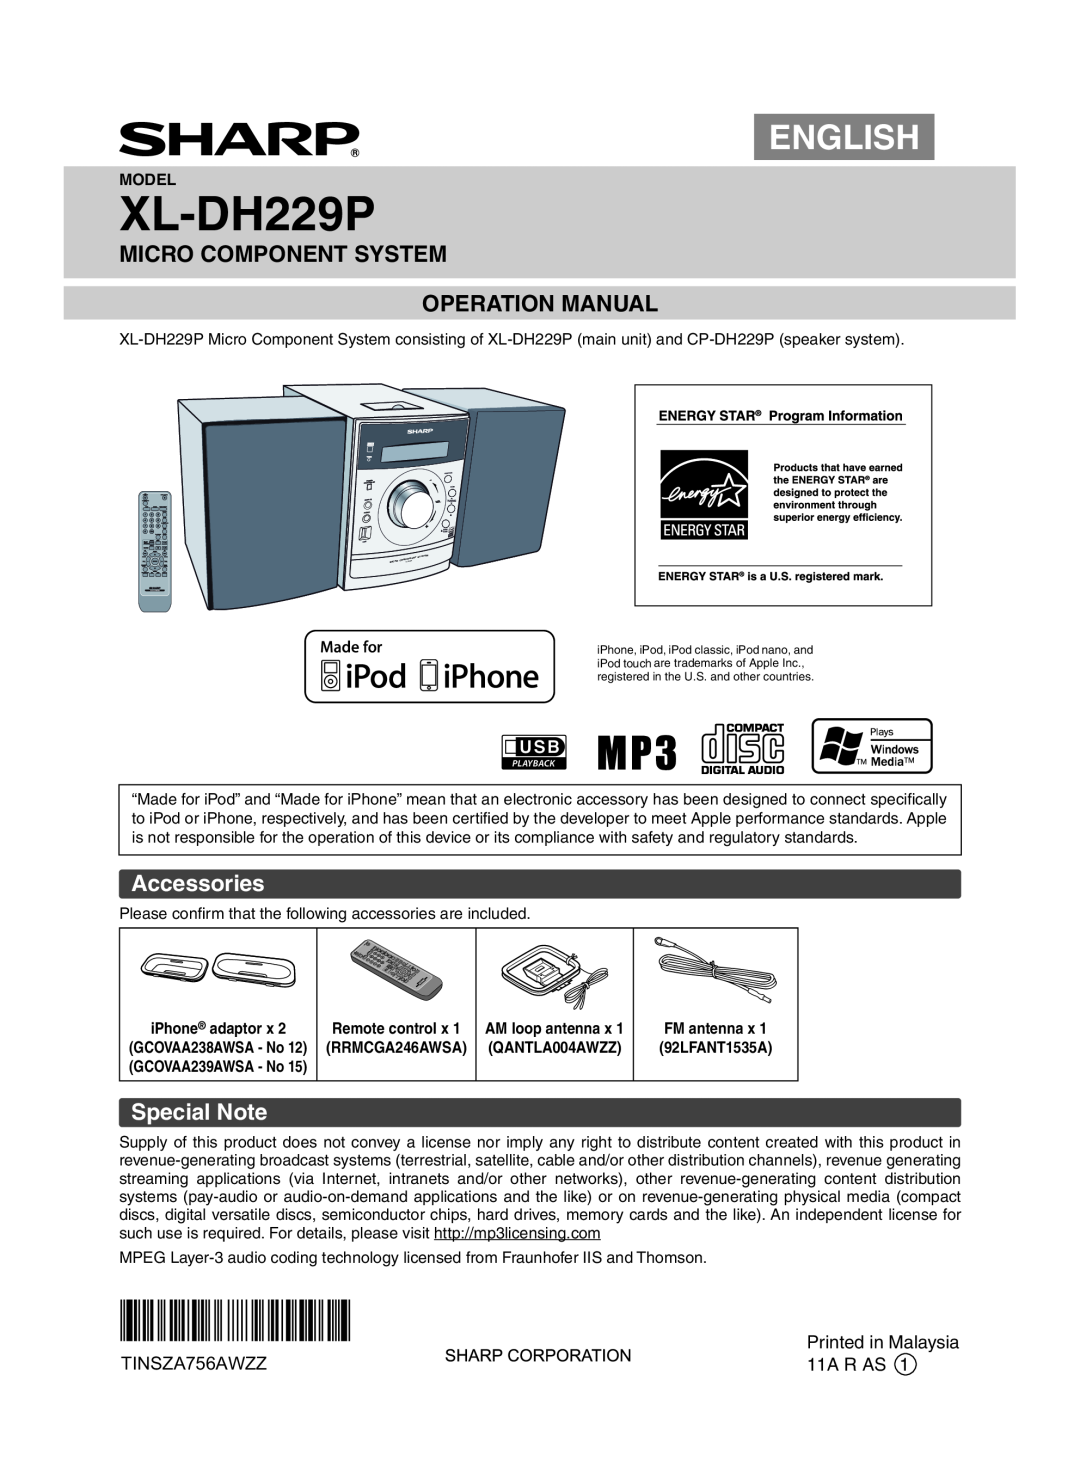 Sharp operation manual Accessories, Special Note, XL-DH229P, English, TINSZA756AWZZ 